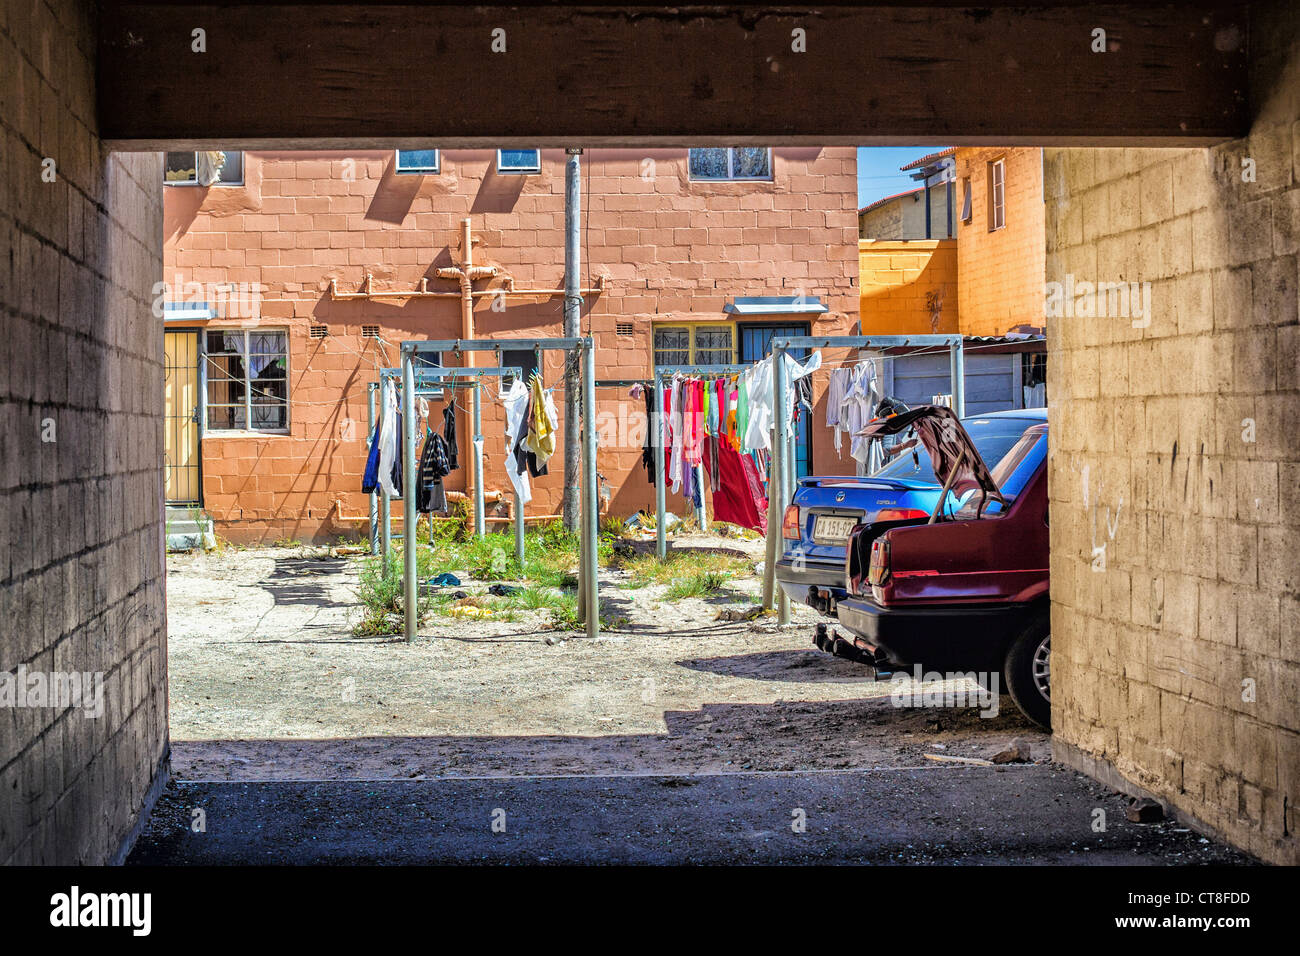 A view of a courtyard, washing lines and cars in Langa African Township near Cape Town, South Africa Stock Photo